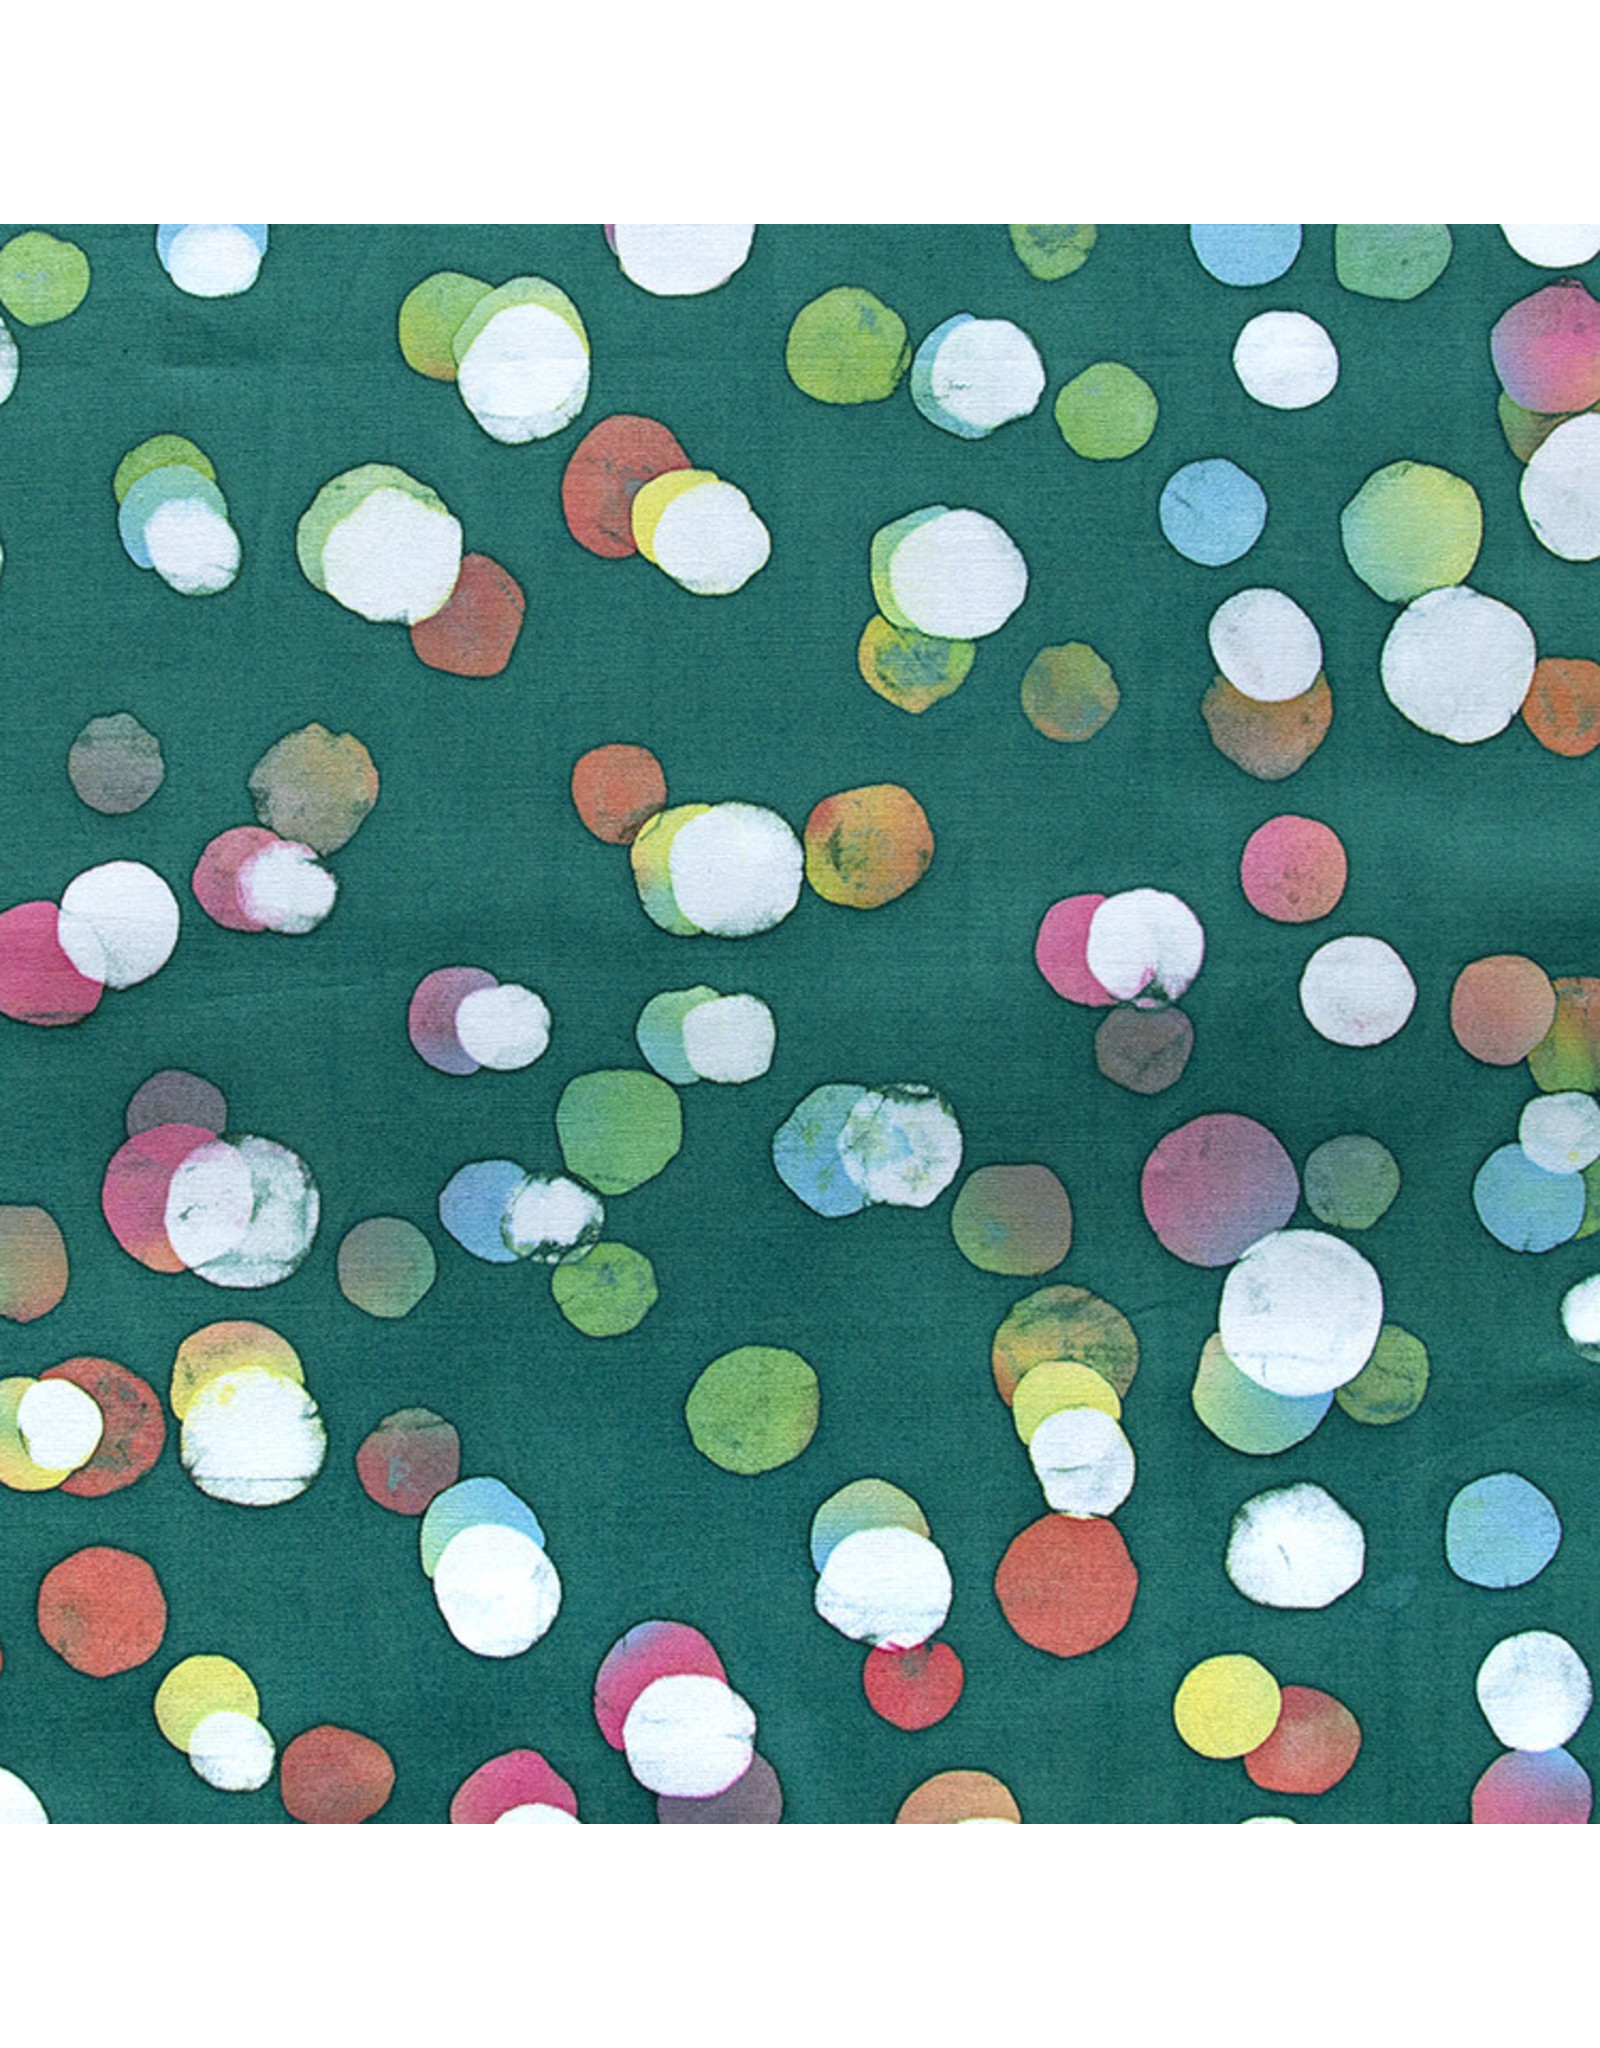 Northcott Color Me Banyan: Cotton Batik, Dot Necessities in Forest Green, Fabric Half-Yards